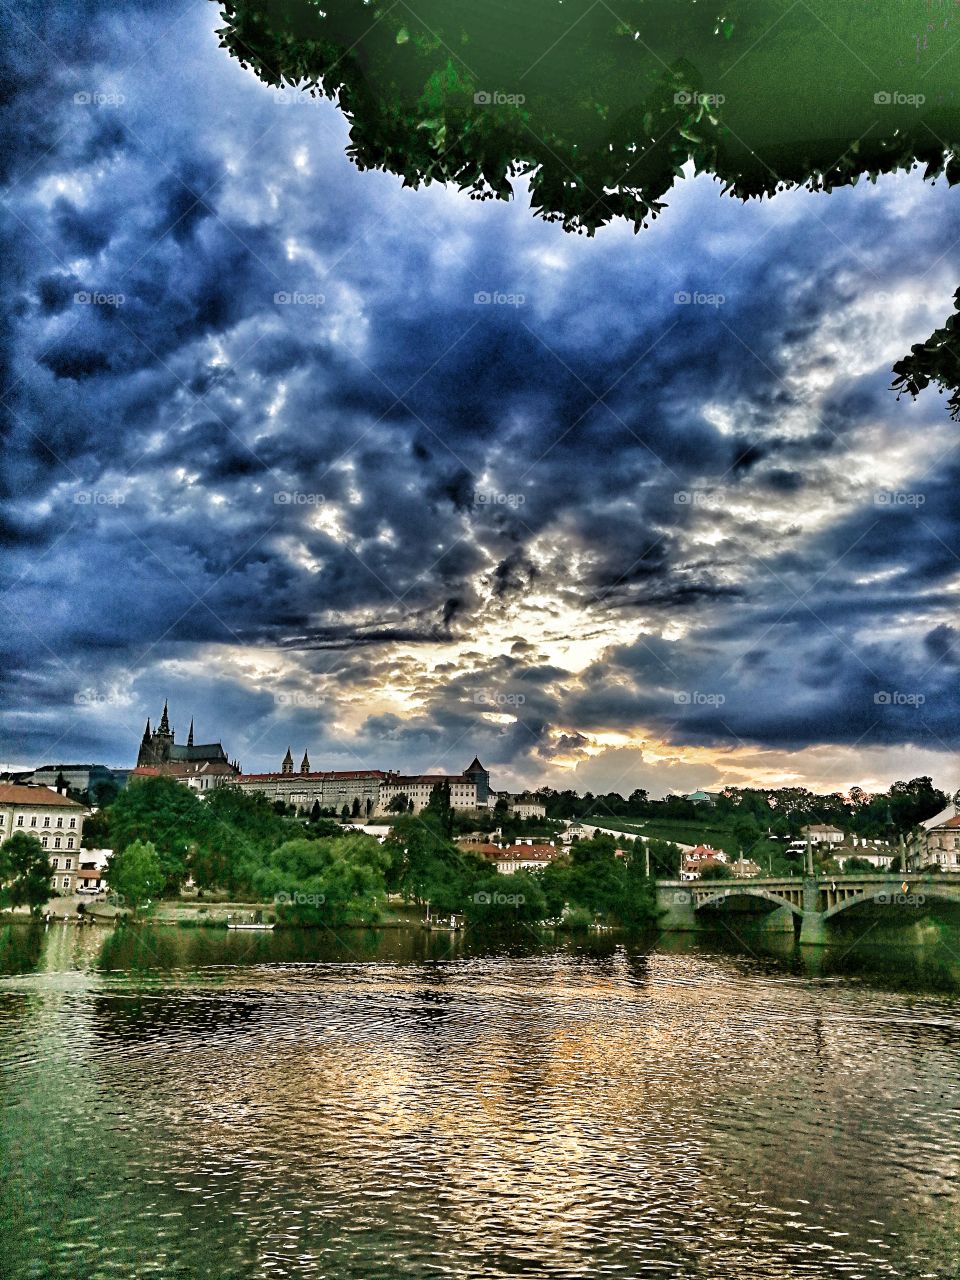 Manesuv most in Prague. Dawn feeling on a cloudy day.